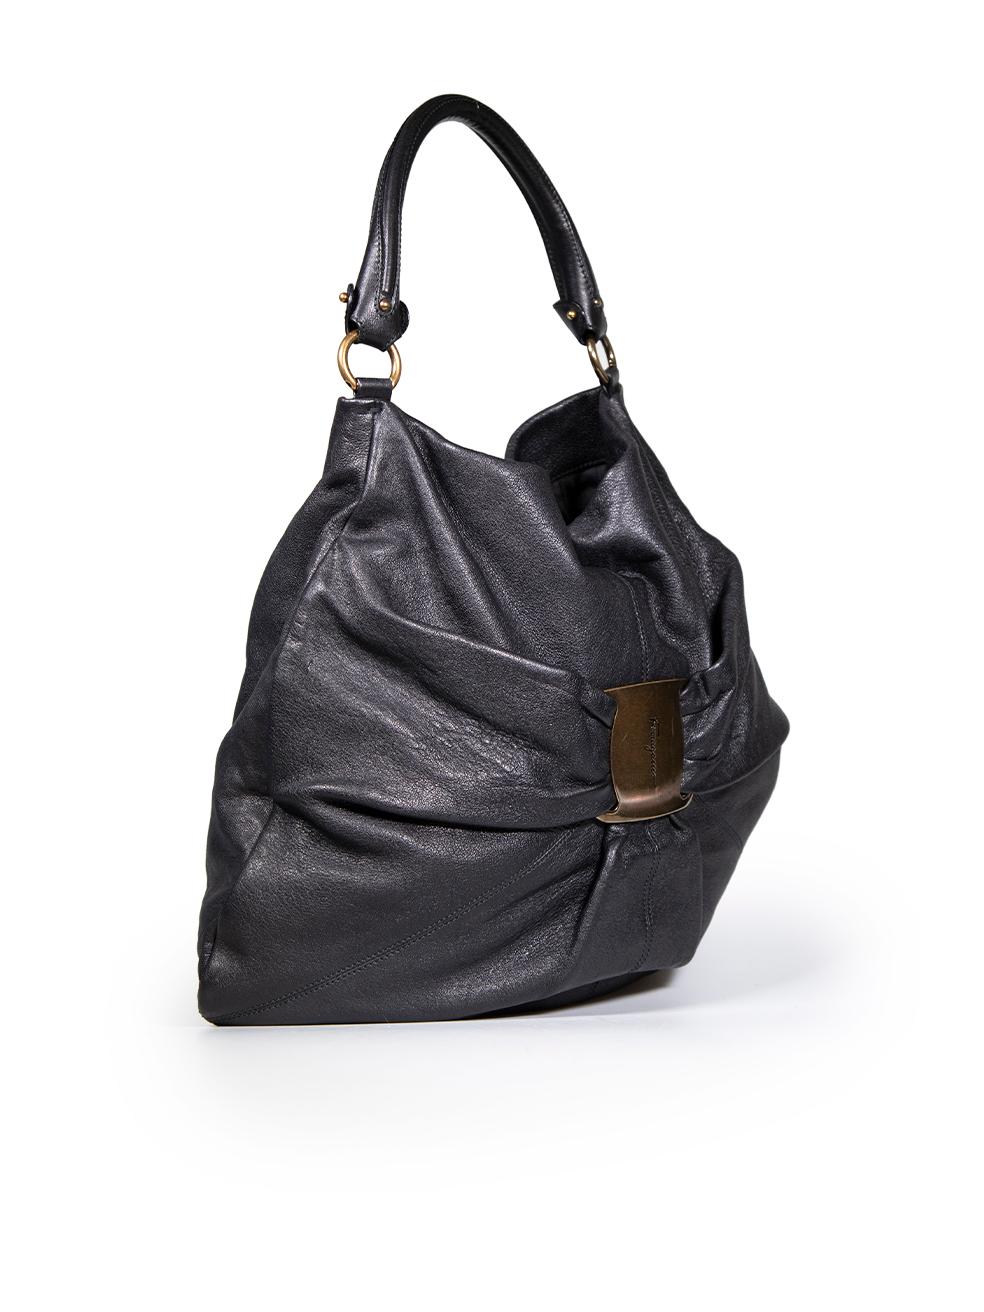 CONDITION is Very good. Minimal wear to bag is evident. Some small scratches to the base and abrasions to the base corners on this used Salvatore Ferragamo designer resale item.
 
 
 
 Details
 
 
 Model: Miss Vara
 
 Black
 
 Leather
 
 Large hobo